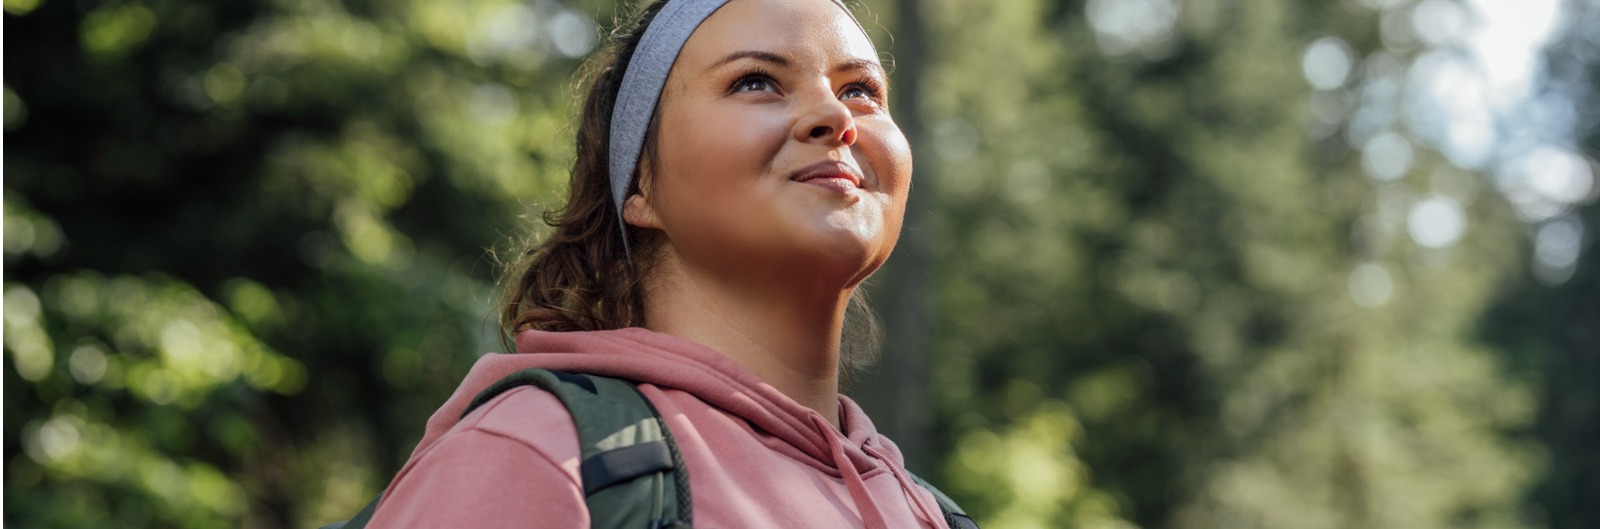 portrait-of-a-beautiful-woman-hiker-smiling-picture-id1600x529.jpg